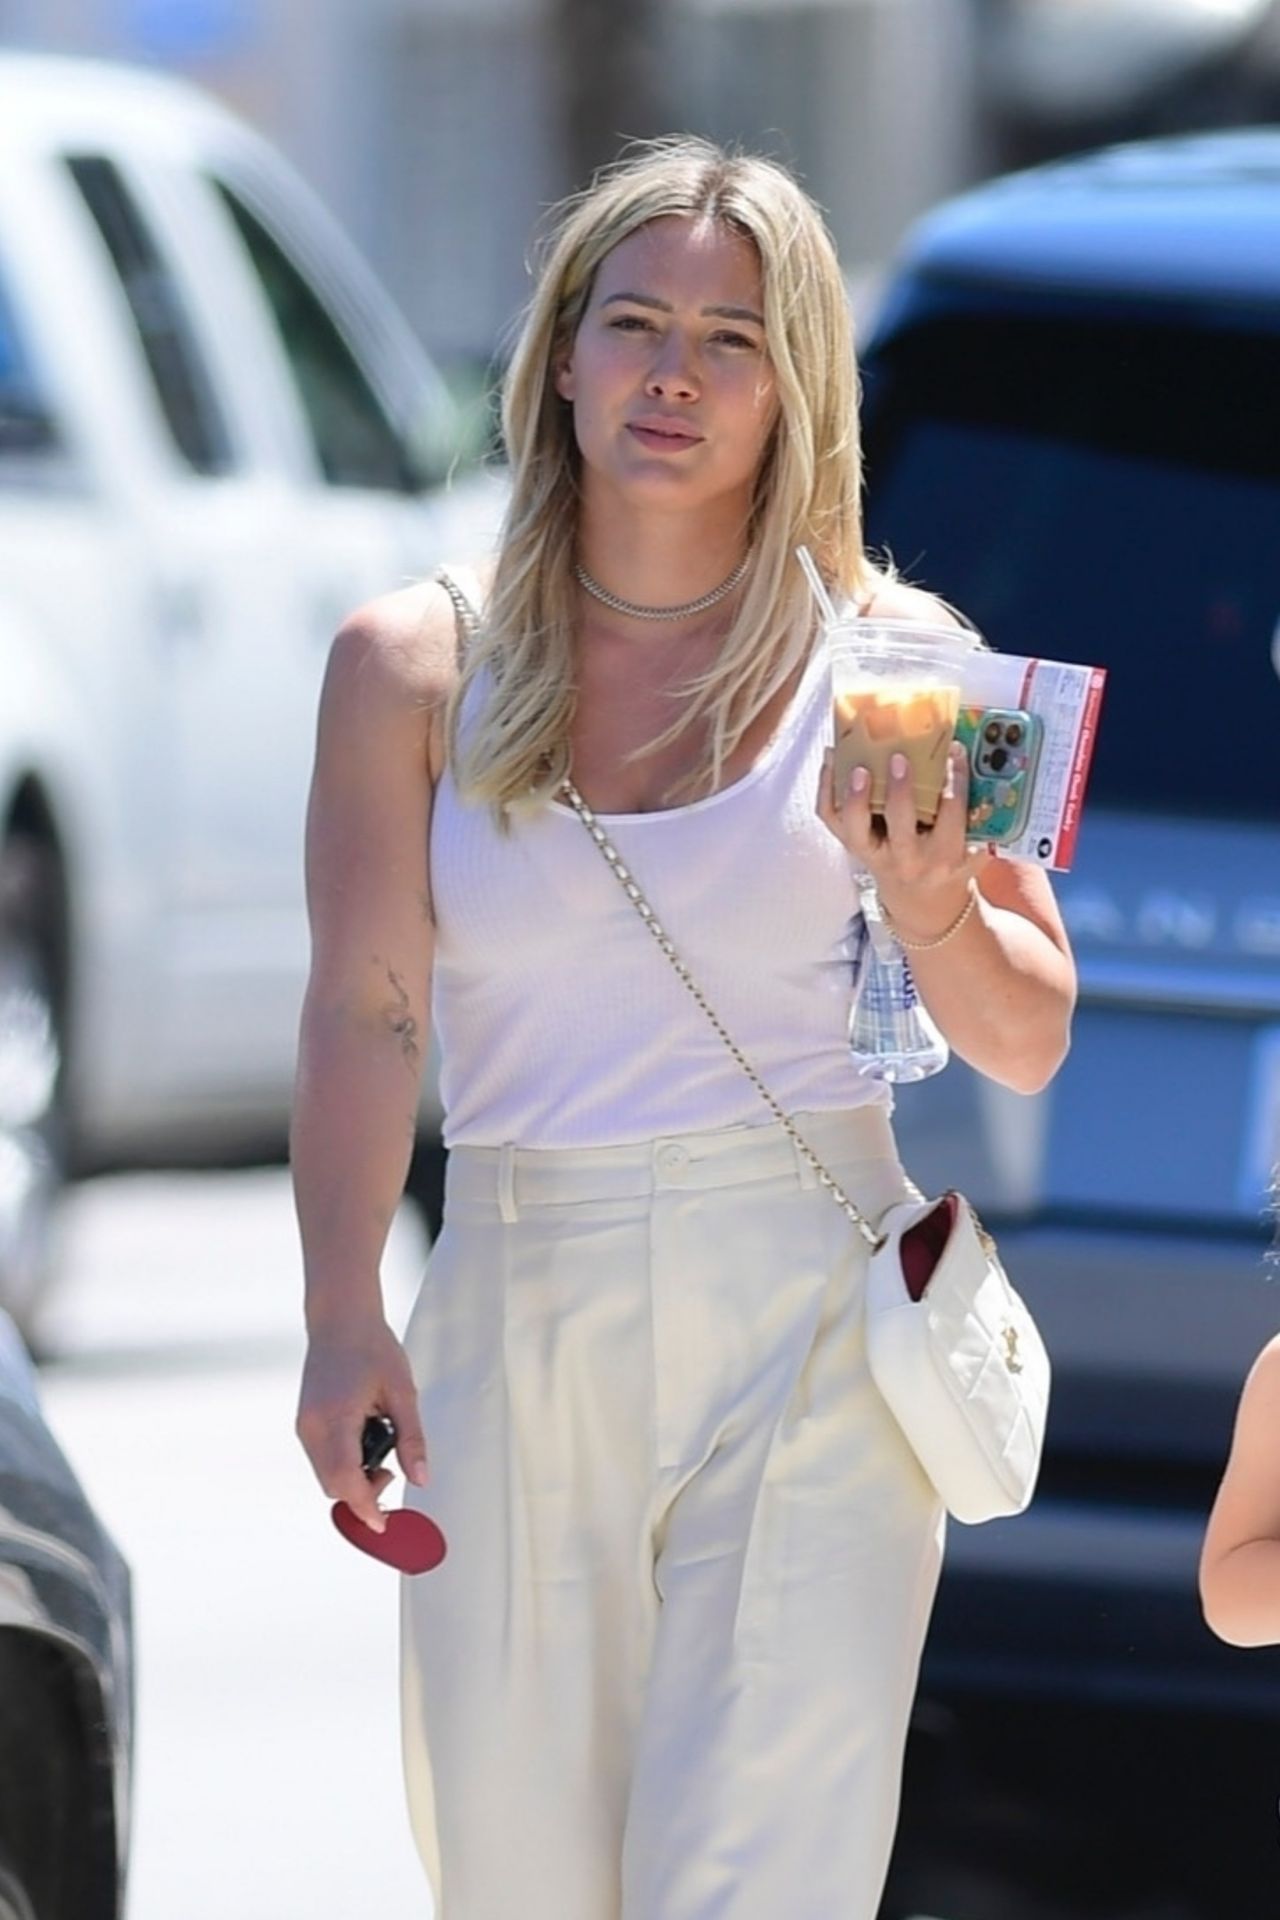 Hilary Duff Out in Hollywood February 22, 2008 – Star Style